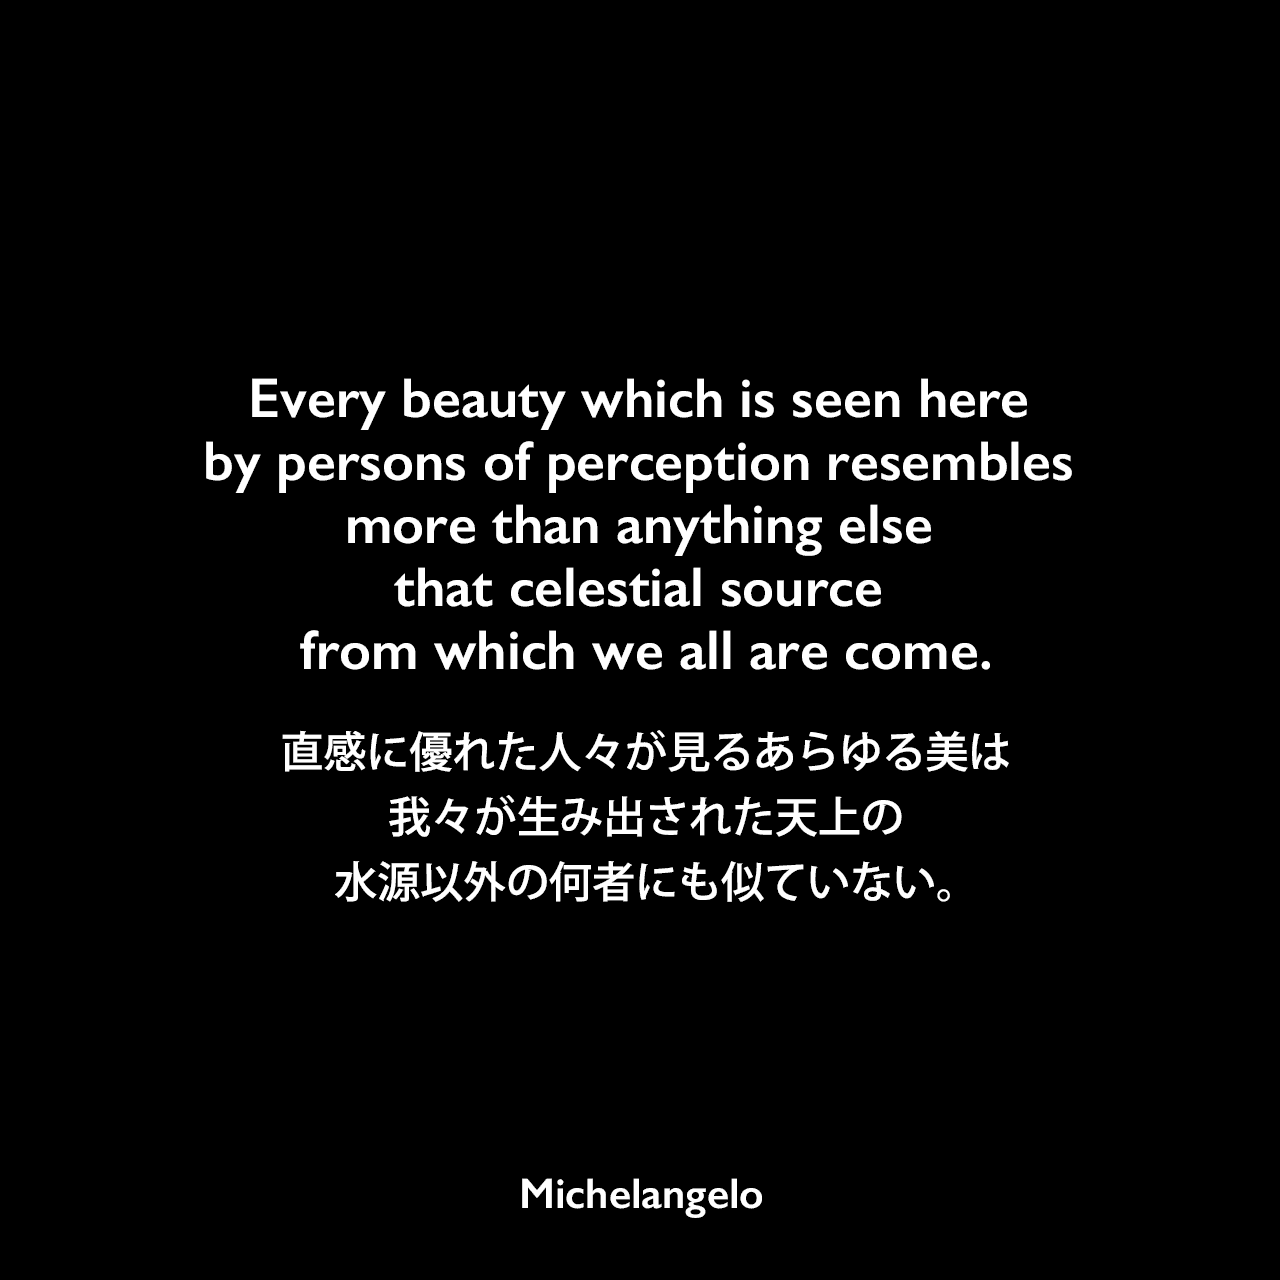 Every beauty which is seen here by persons of perception resembles more than anything else that celestial source from which we all are come.直感に優れた人々が見るあらゆる美は、我々が生み出された天上の水源以外の何者にも似ていない。Michelangelo